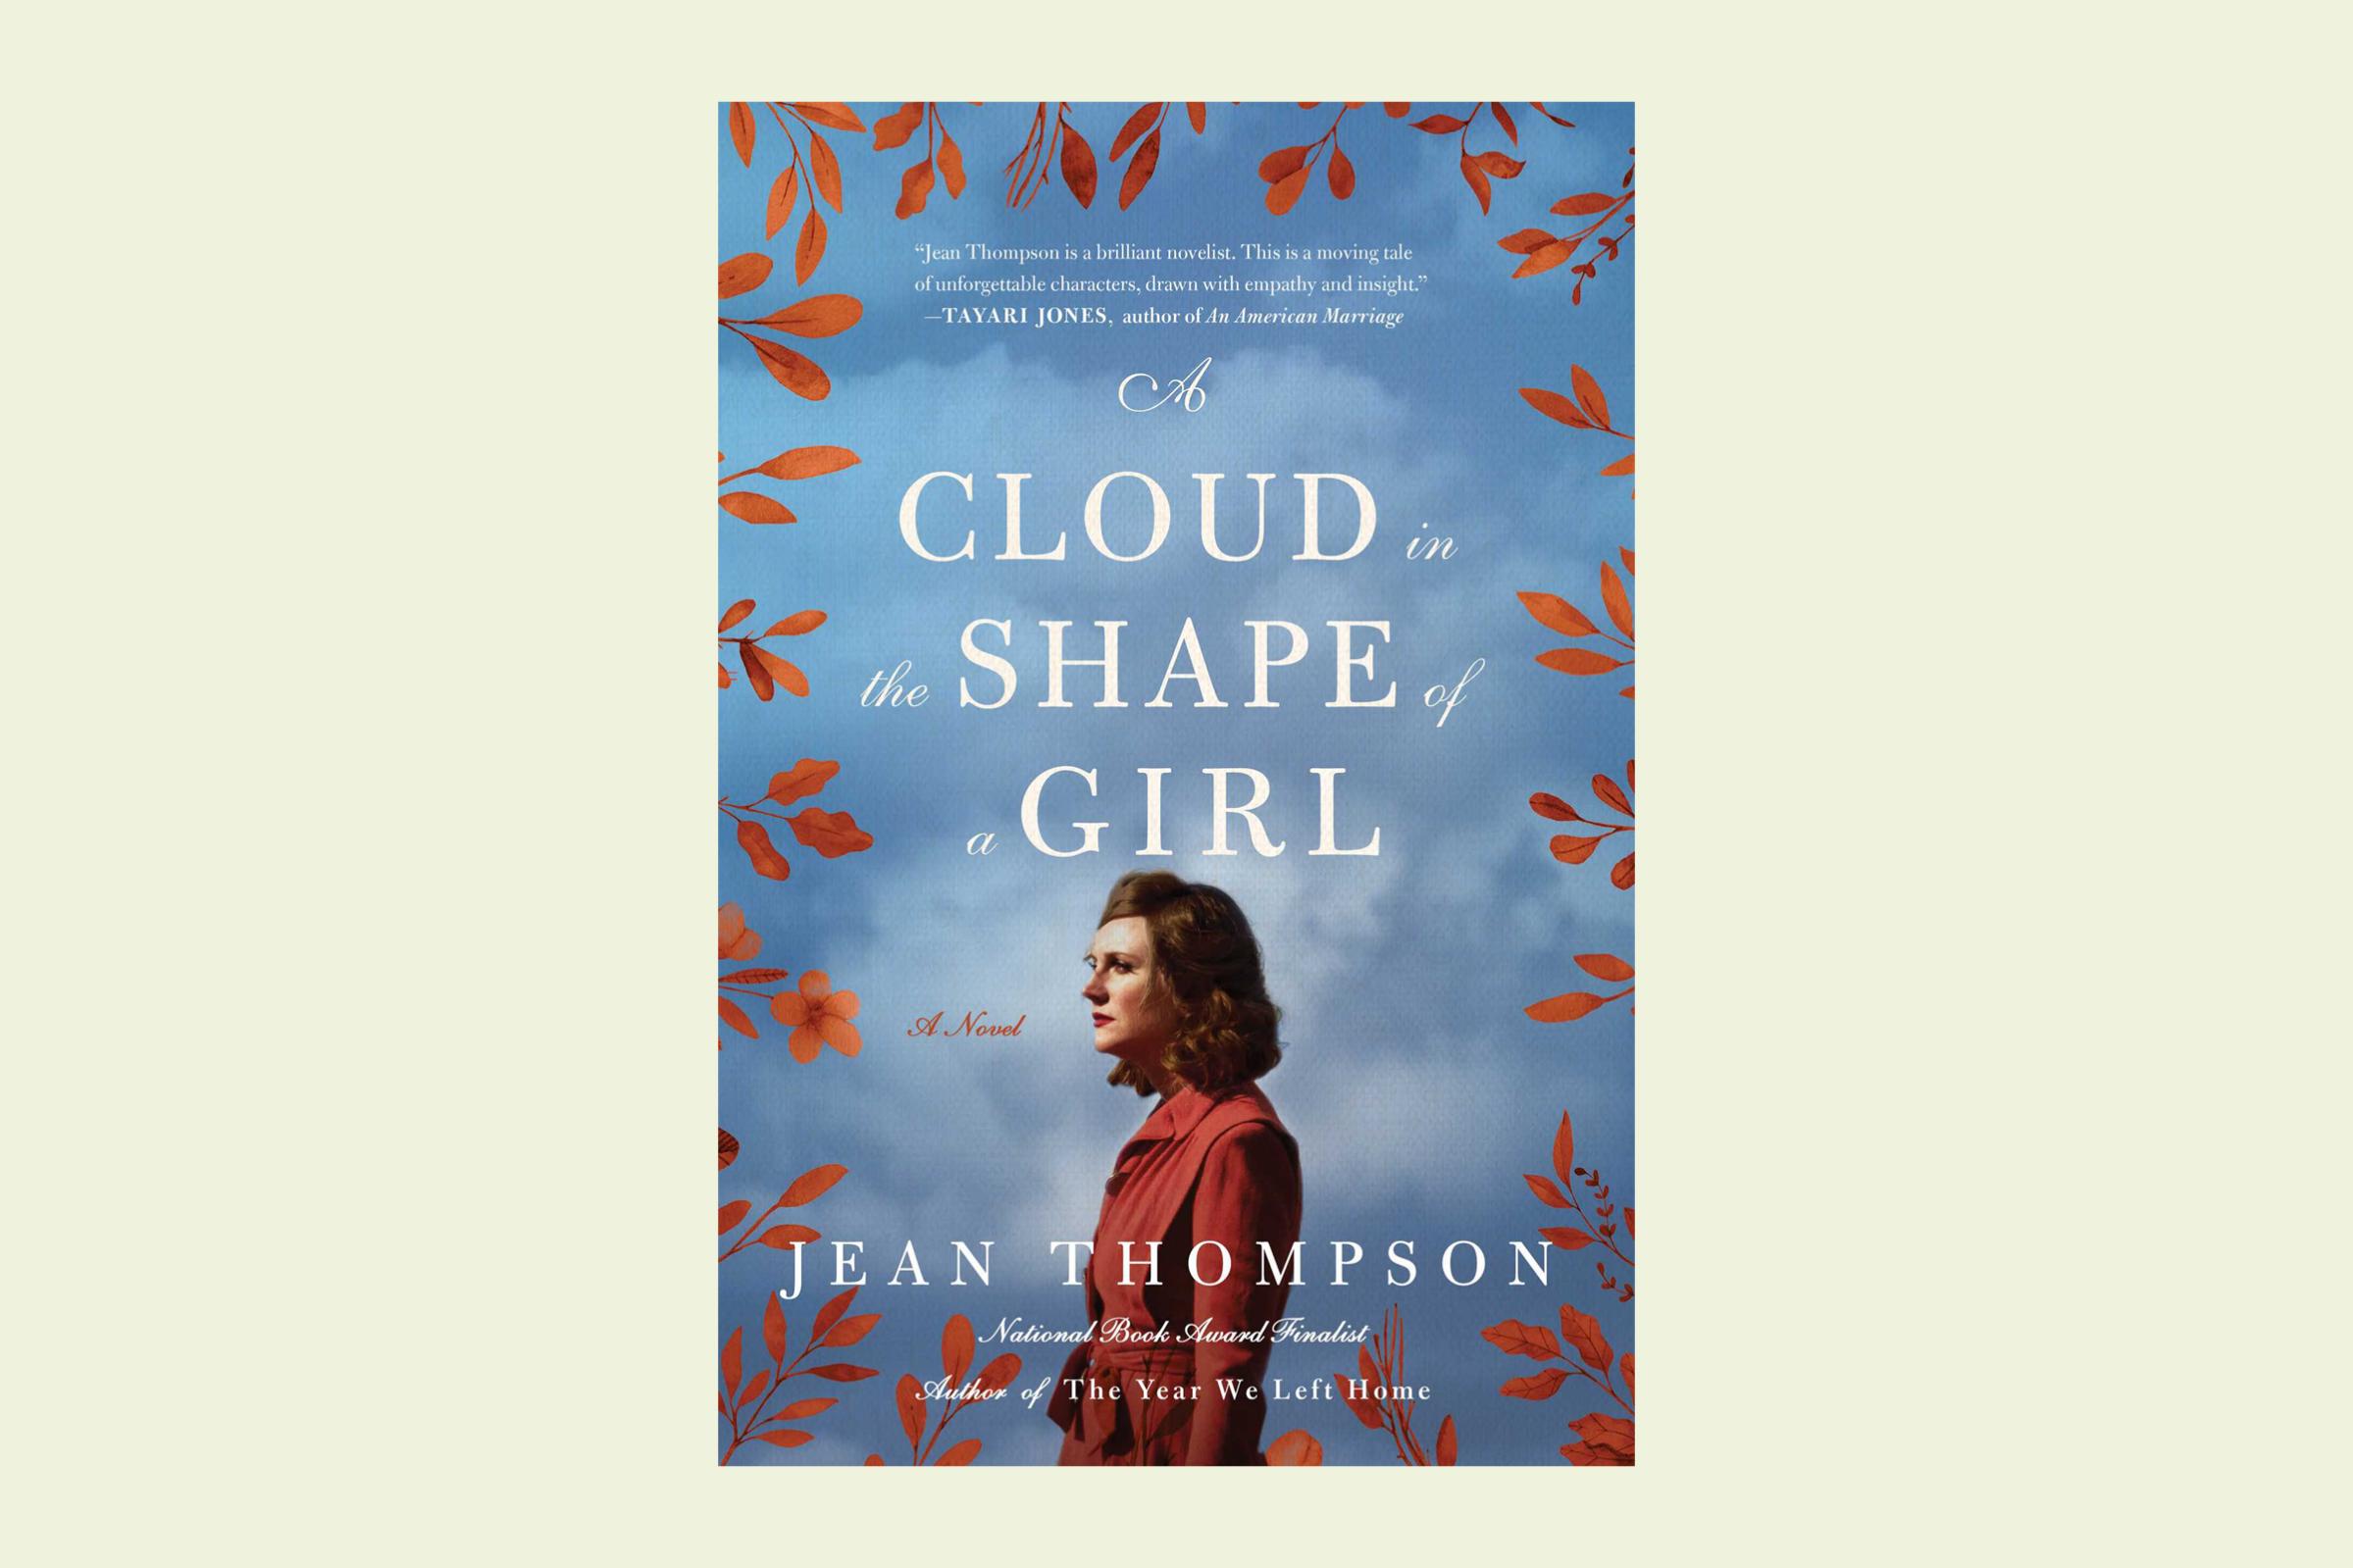 A Cloud the Shape of a Girl by Jean Thompson